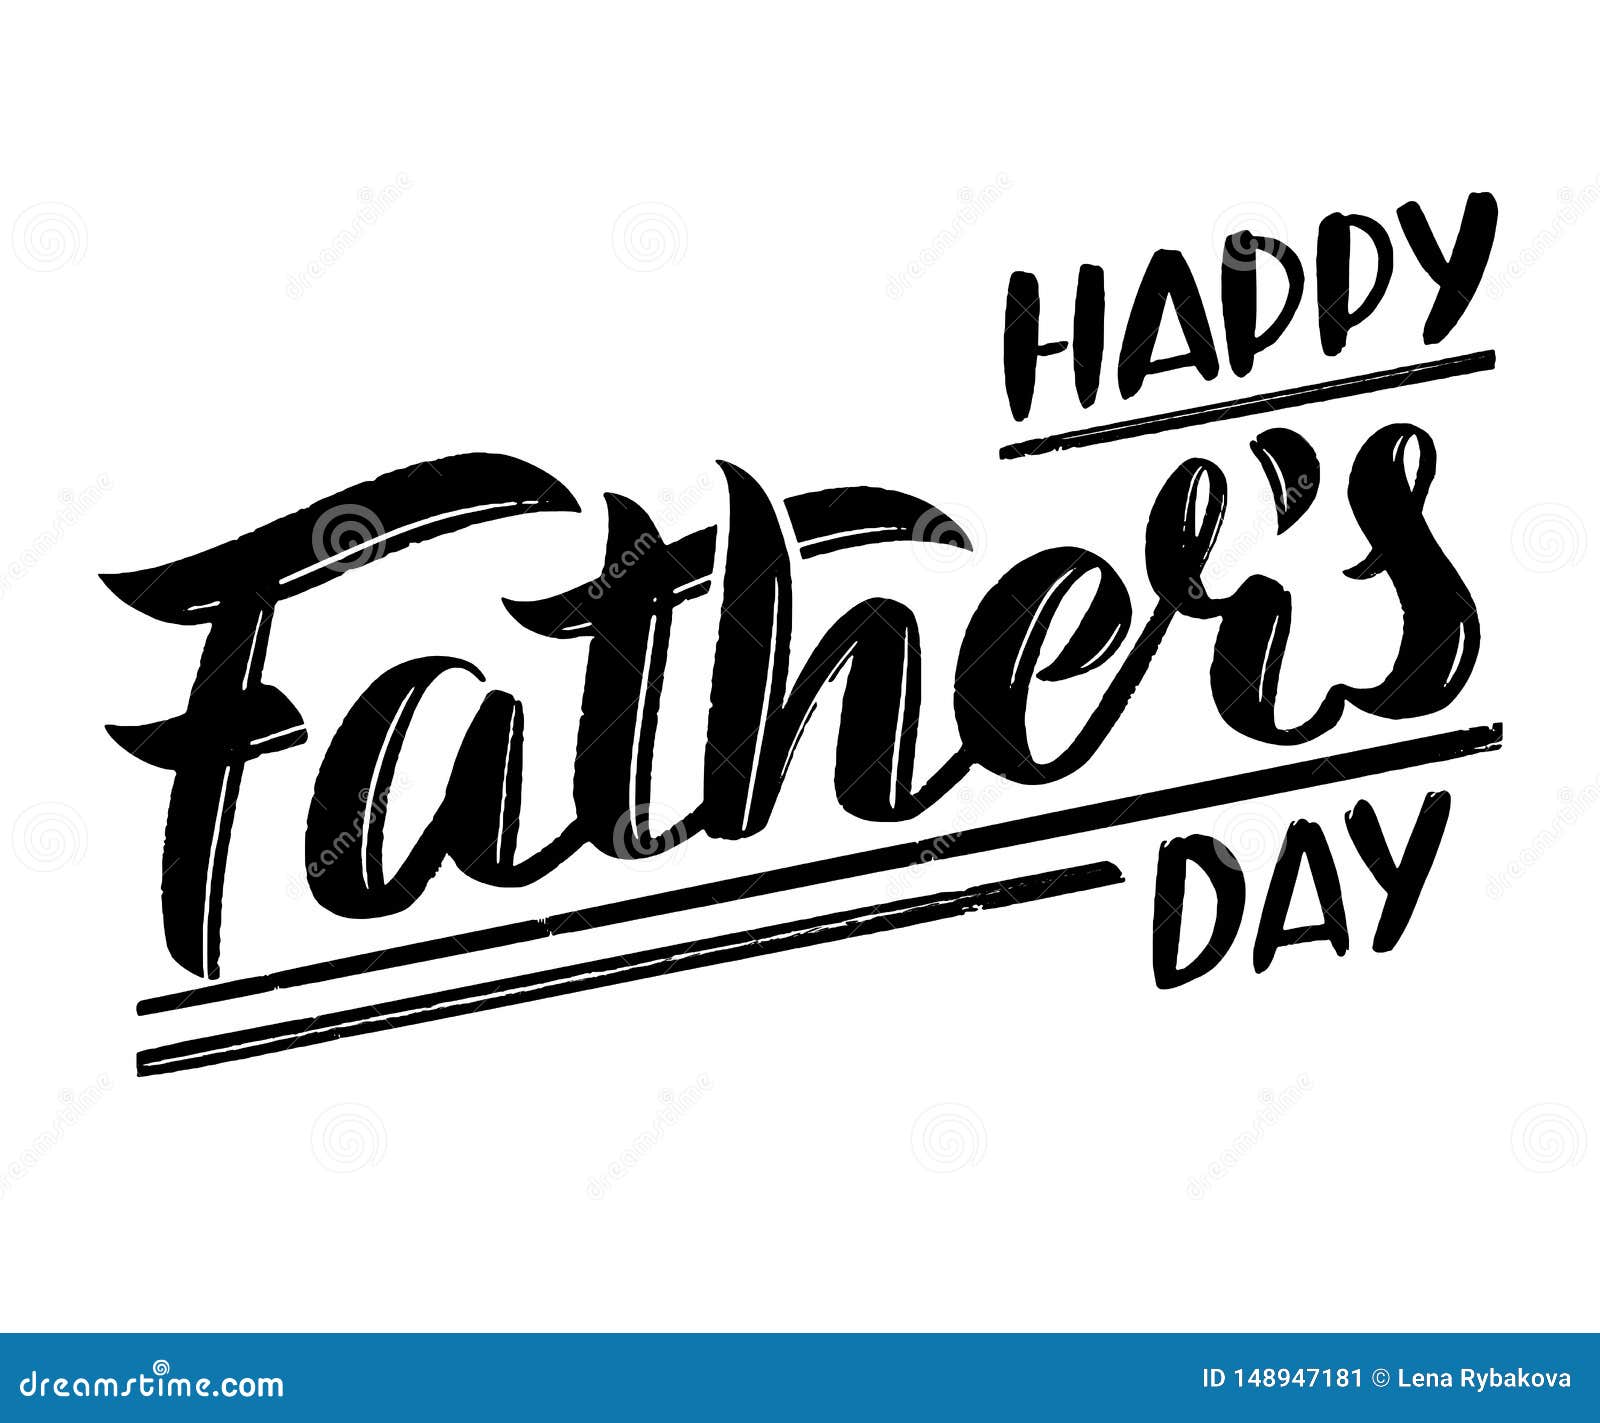 Fathers Day Calligraphy In Black And White Stock Vector Illustration Of Fathers Title